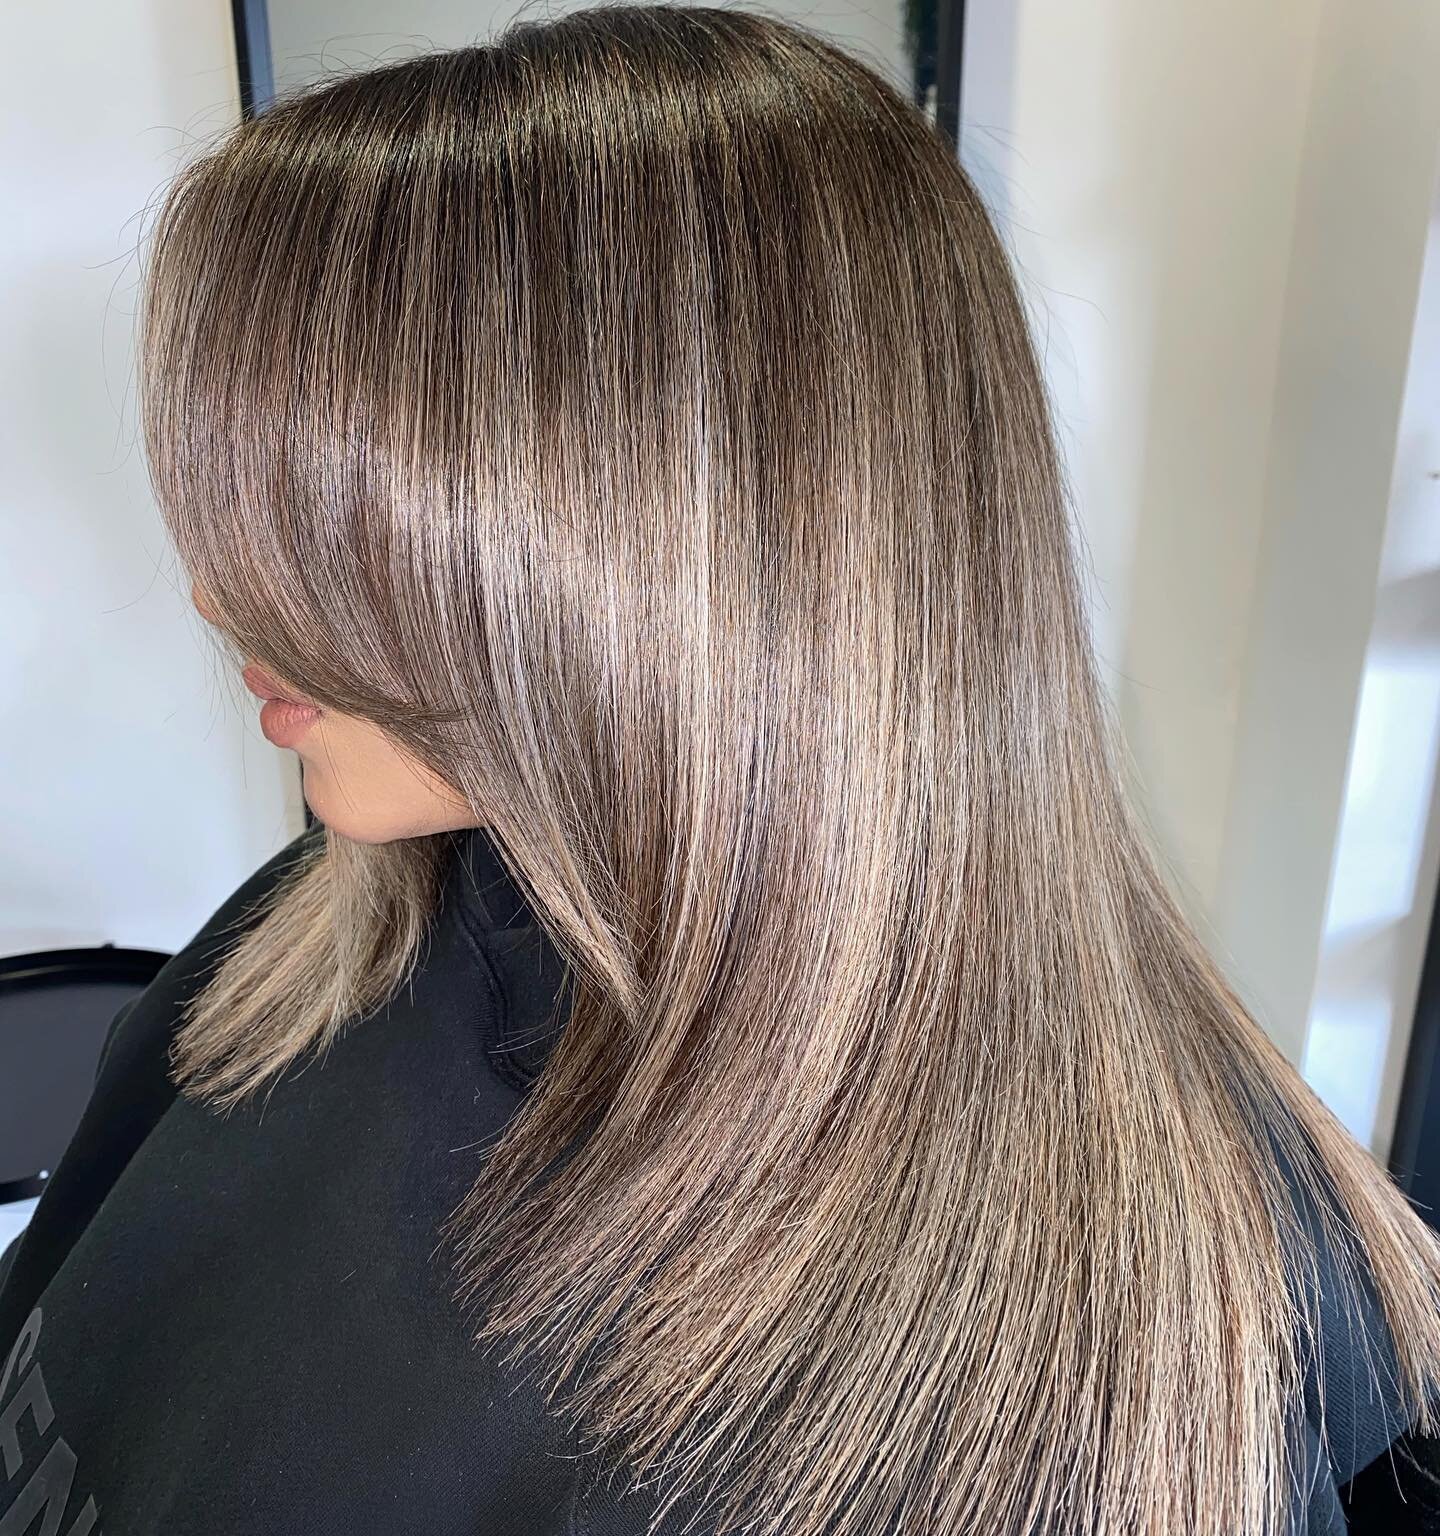 𝐜𝐨𝐨𝐥 𝐚𝐬 𝐟**𝐤🧊  balayage on the beaut @zaradarbarr using @matrix new cool brown palette, incredible shade &amp; immense shine. For all bookings and enquiries please call 01254 785954.

-
-
-
-
#ElliotCaffreyHair #hairextensionspecialist #hair